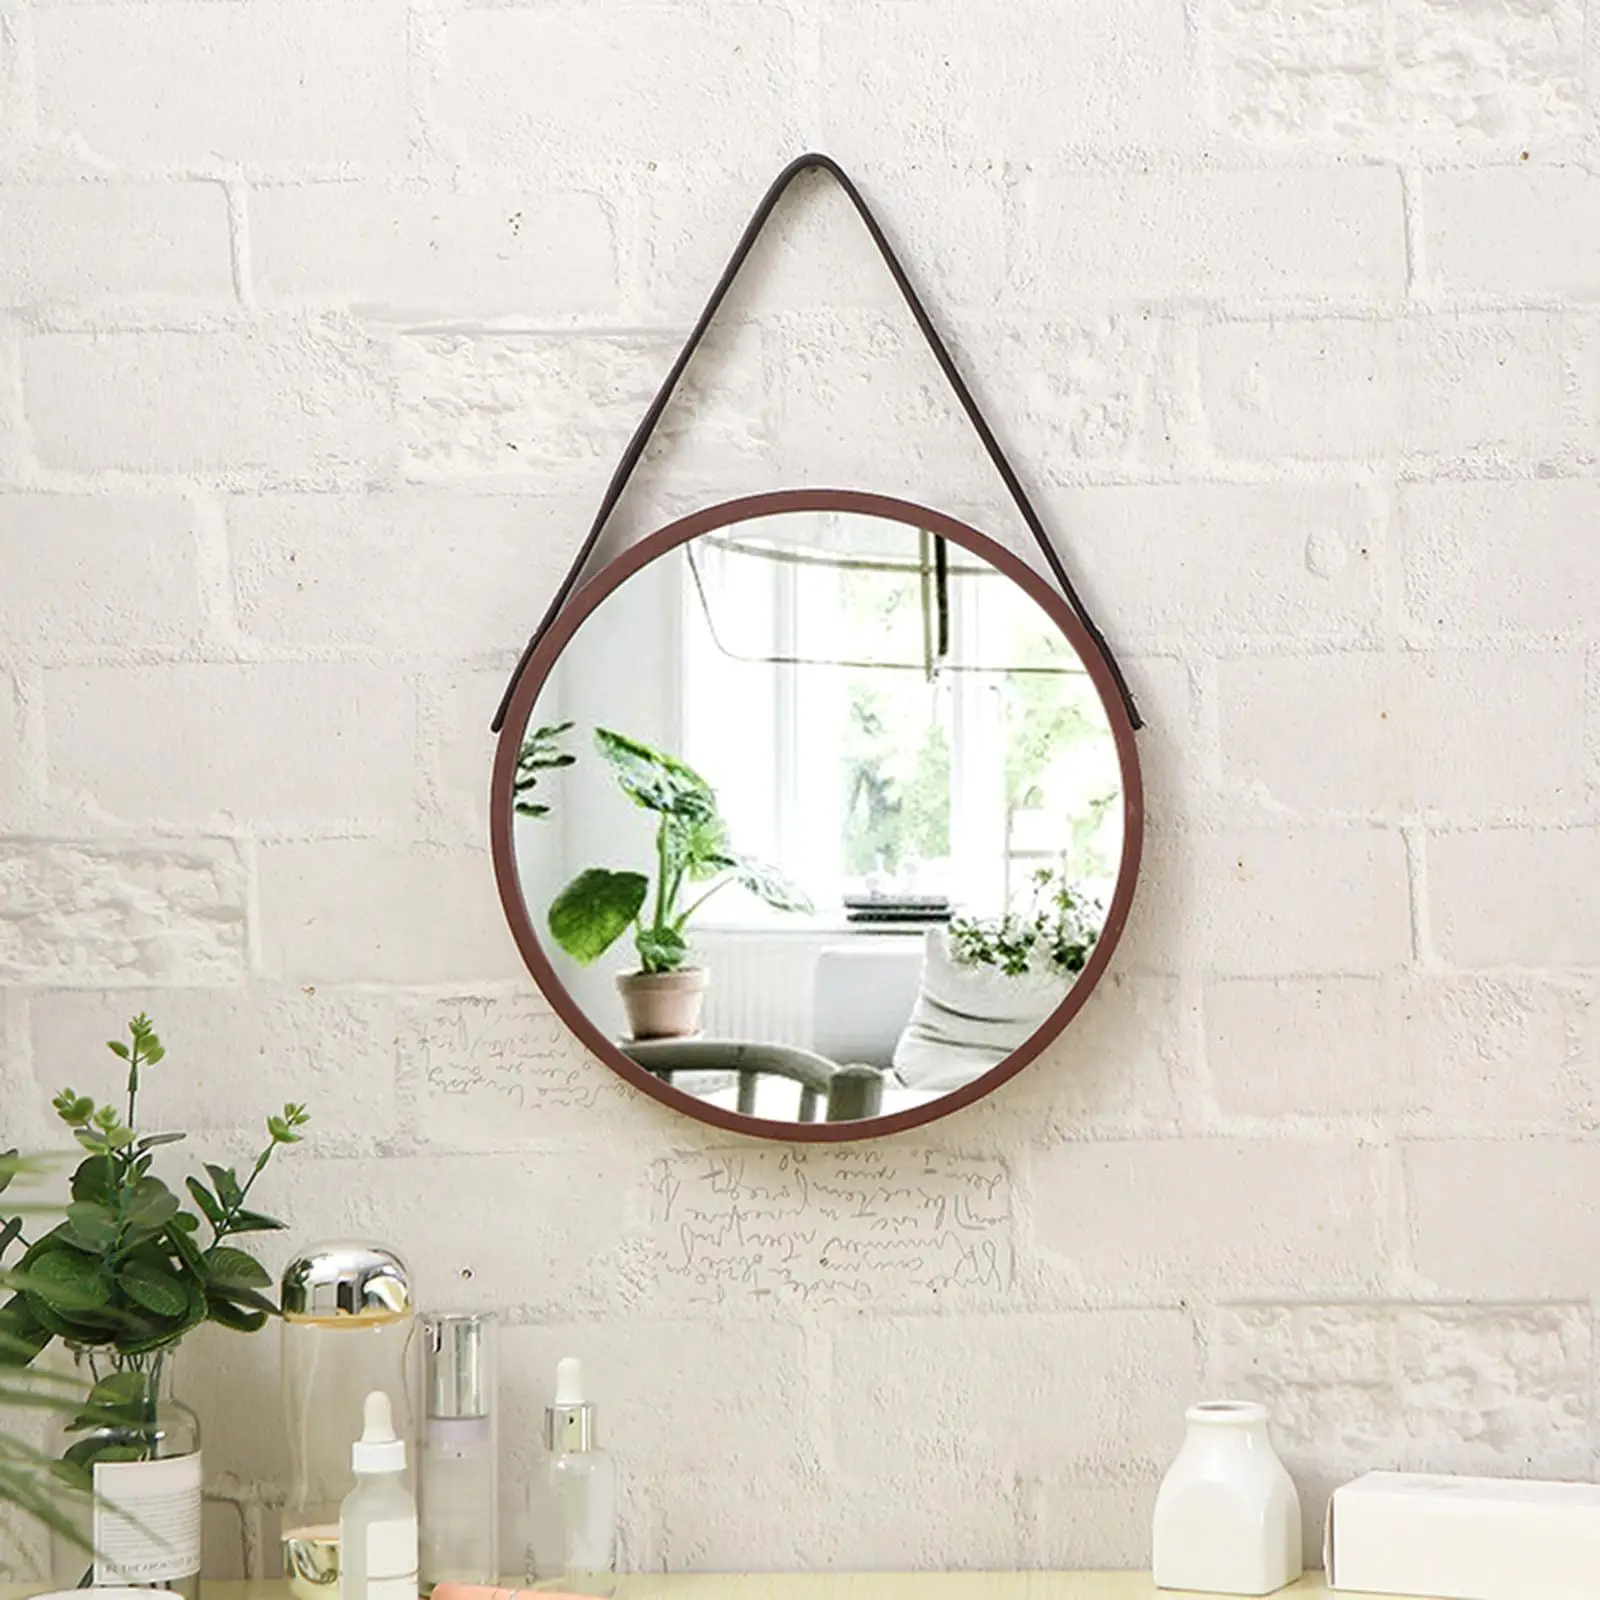 Round Wall Mirror with Circle Circular Frame Decorative Hanging Rope for Rustic Bathroom Vanity Entryway Living Room Bed Decor